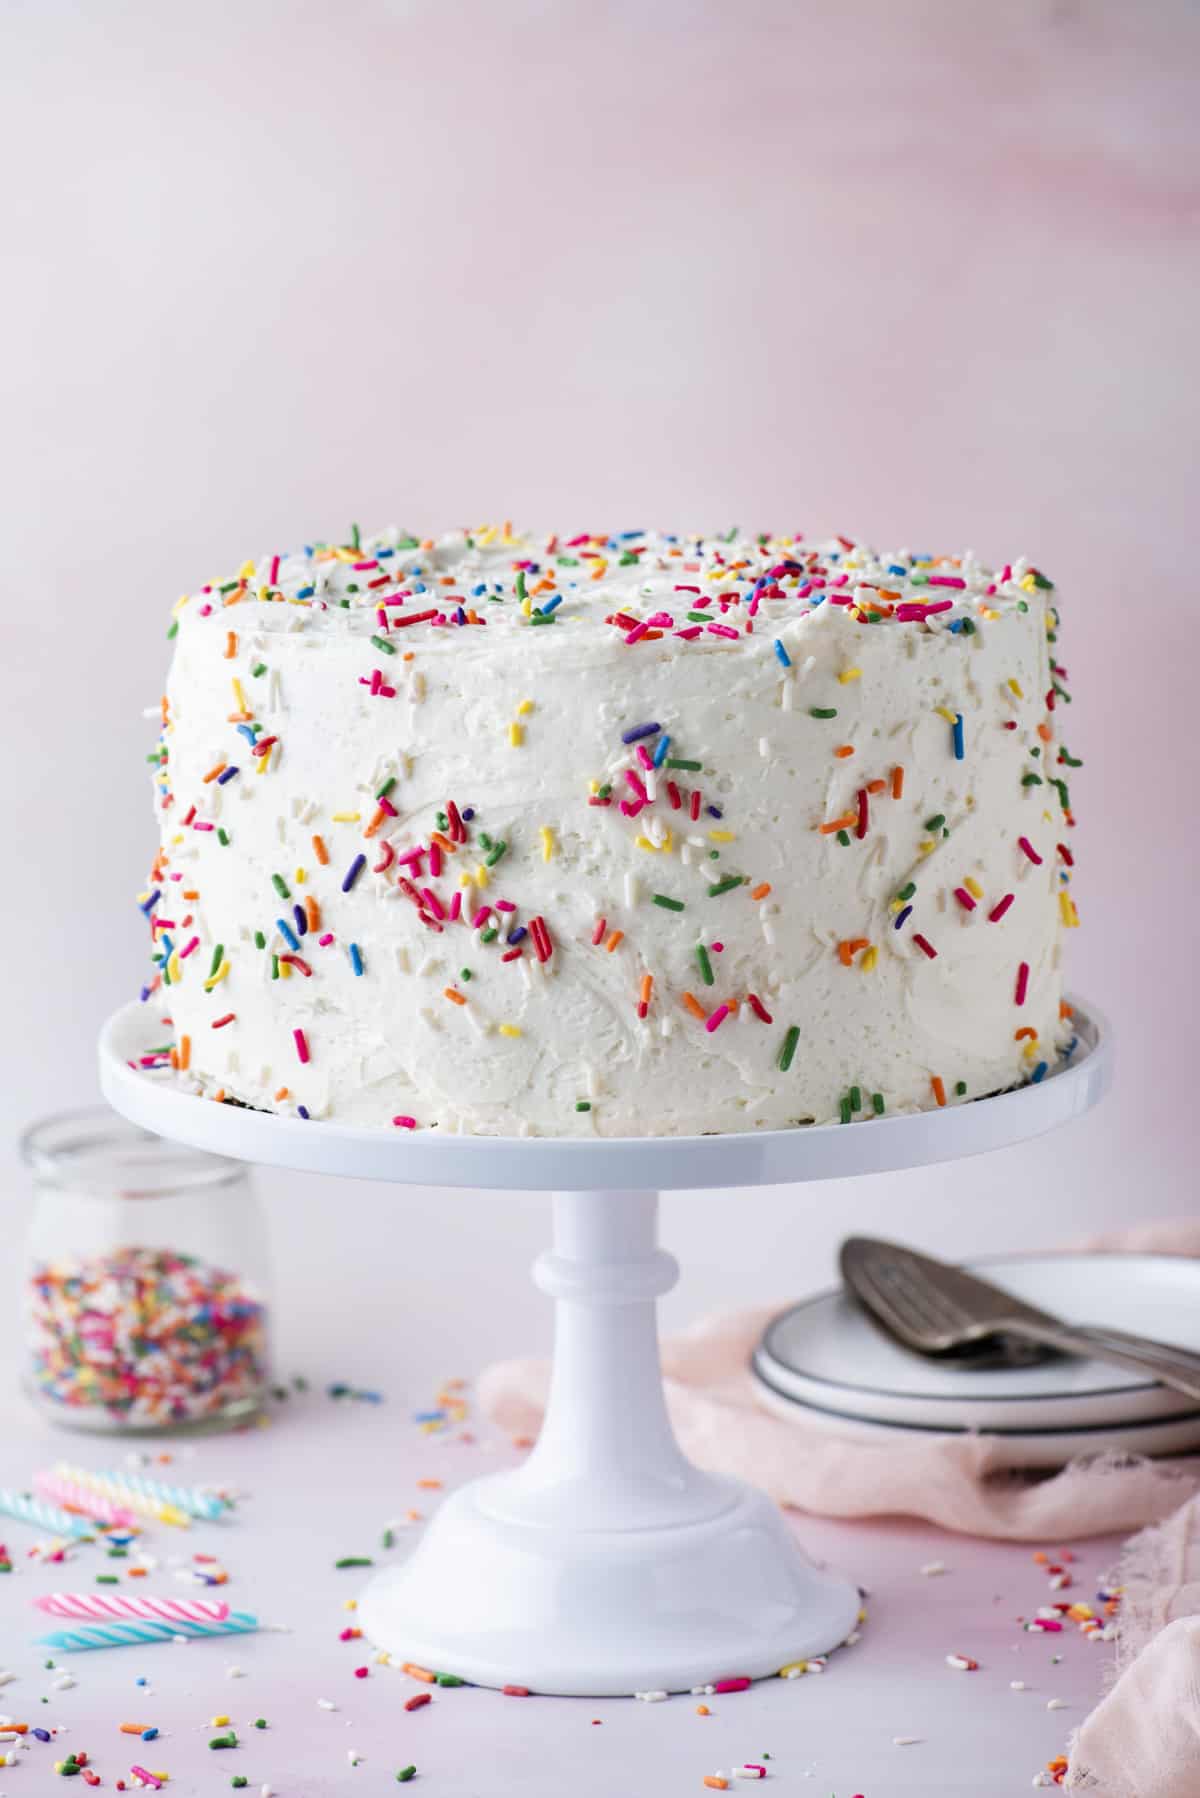 a funfetti cake decorated with white icing and sprinkles on a white cake stand against a pink background with sprinkles, birthday candles, a clear container of sprinkles, plates and utensils surrounding it